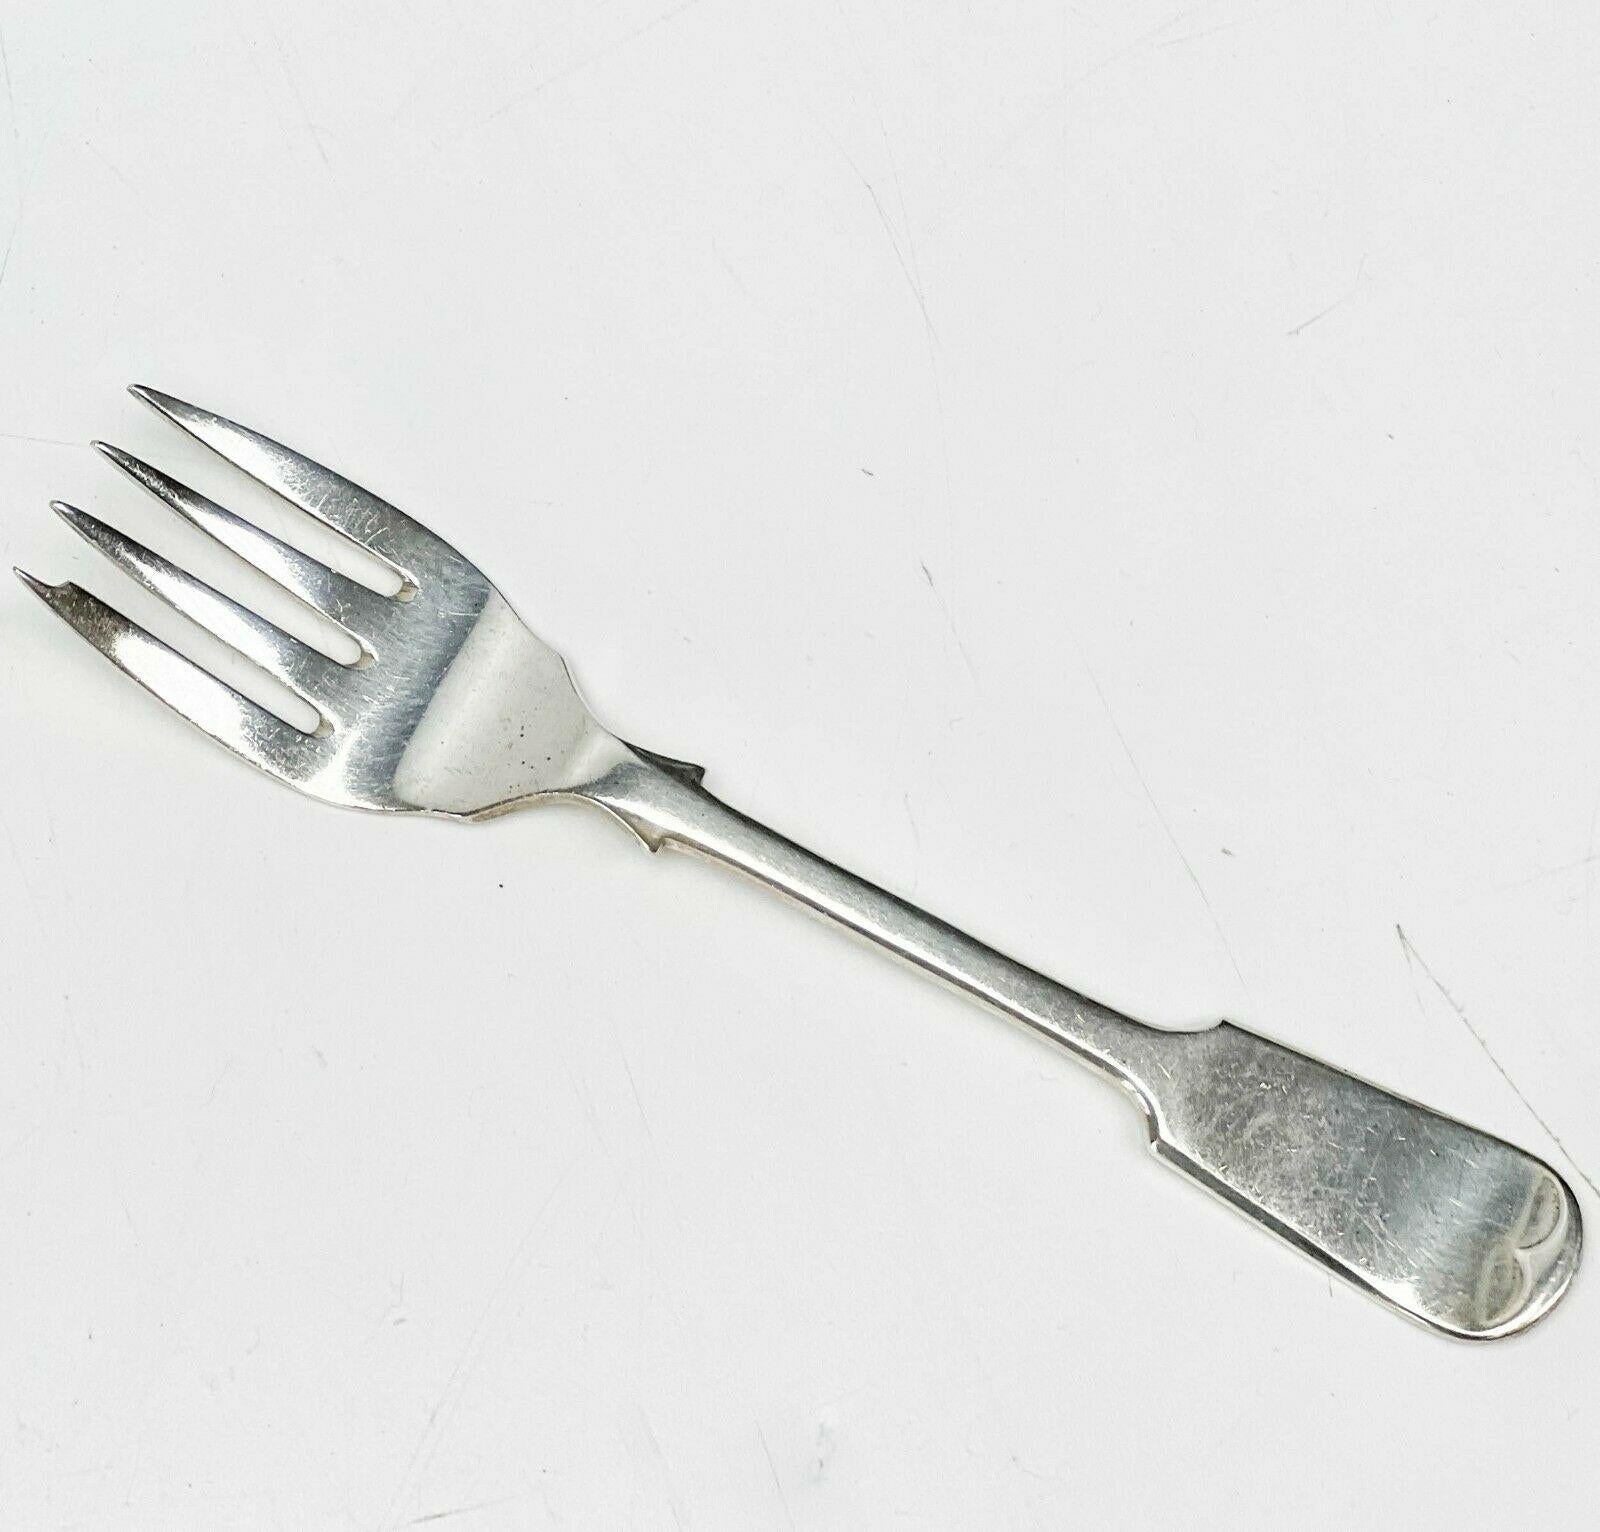 12 Cooper & Sons Ltd English sterling silver fish forks fiddle pattern, 1947

Underside with Sheffield silver hallmarks.

Additional information:
Composition: Sterling Silver 
Type: Fork
Dimension: 6.25 inches length
Weight: 20.06 ozt